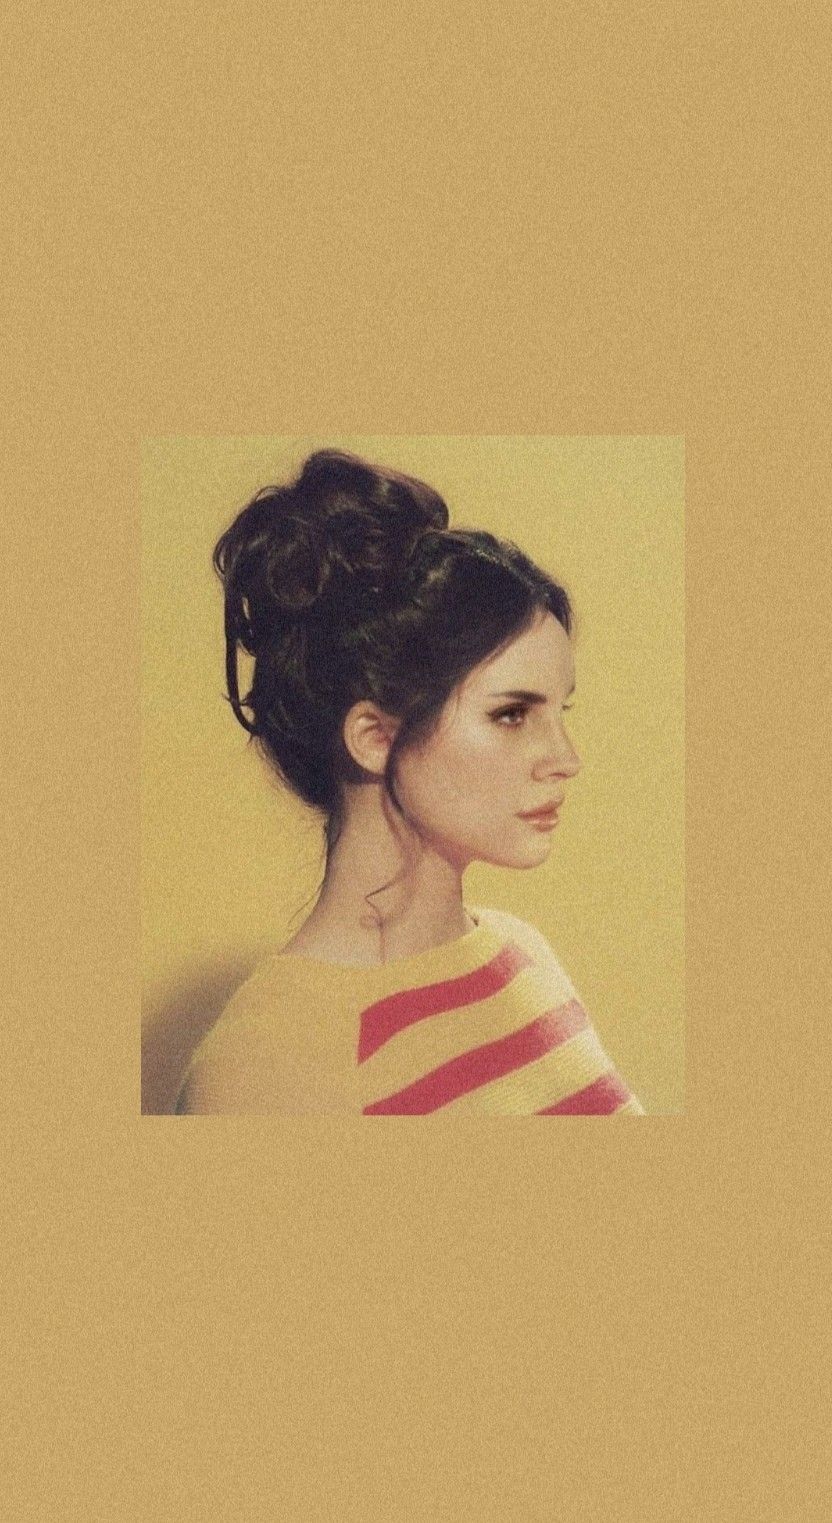 A woman with her hair in bun is looking at the camera - Lana Del Rey